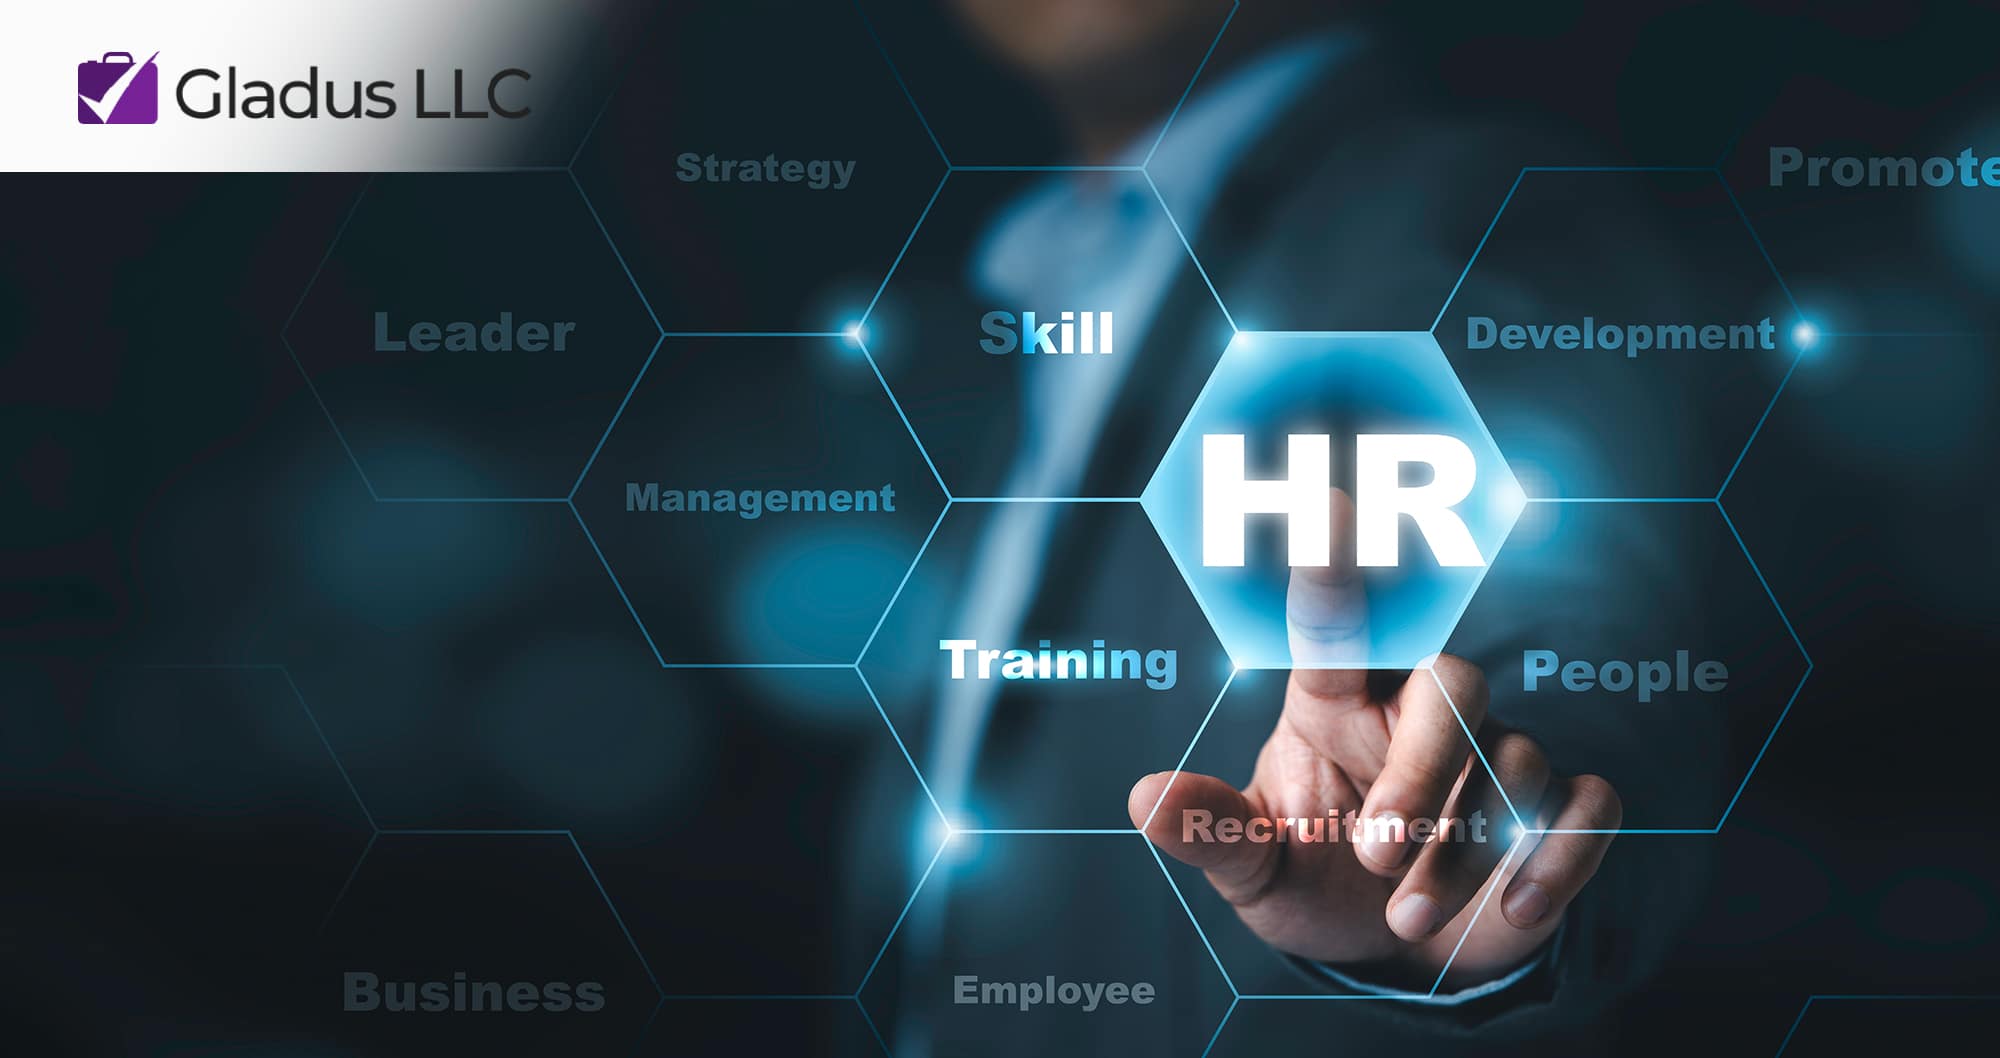 How to Improve Your HR Skills